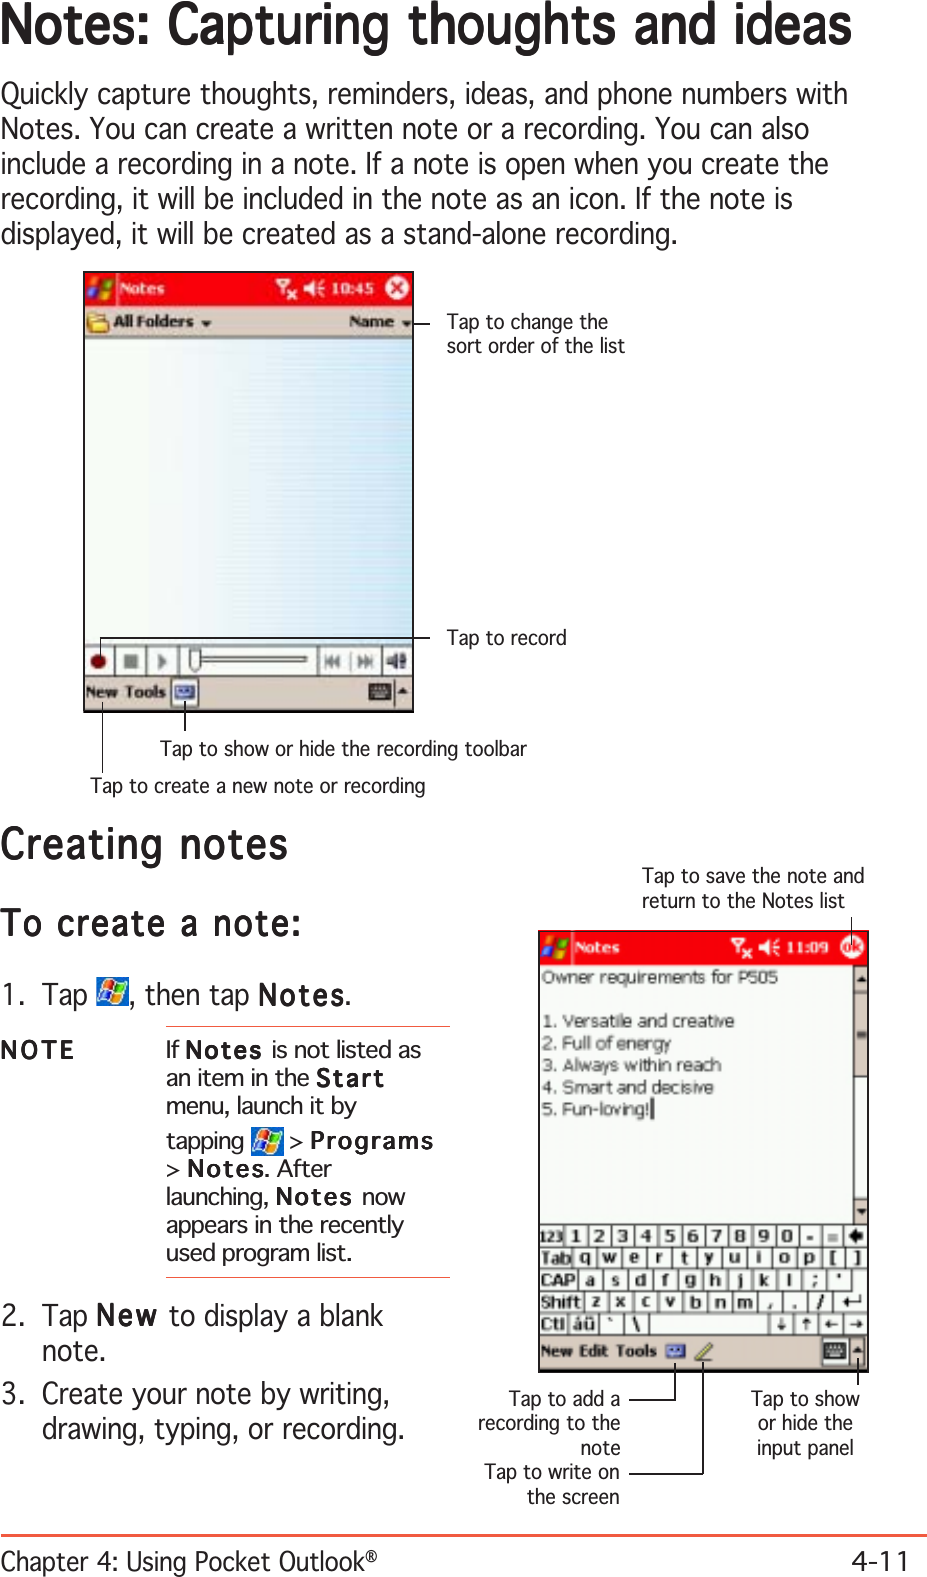 Chapter 4: Using Pocket Outlook®4-11Notes: Capturing thoughts and ideasNotes: Capturing thoughts and ideasNotes: Capturing thoughts and ideasNotes: Capturing thoughts and ideasNotes: Capturing thoughts and ideasQuickly capture thoughts, reminders, ideas, and phone numbers withNotes. You can create a written note or a recording. You can alsoinclude a recording in a note. If a note is open when you create therecording, it will be included in the note as an icon. If the note isdisplayed, it will be created as a stand-alone recording.Creating notesCreating notesCreating notesCreating notesCreating notesTo create a note:To create a note:To create a note:To create a note:To create a note:1. Tap  , then tap NotesNotesNotesNotesNotes.NOTENOTENOTENOTEN O T E If NotesNotesNotesNotesN o t e s  is not listed asan item in the StartStartStartStartStartmenu, launch it bytapping  &gt; ProgramsProgramsProgramsProgramsPrograms&gt;NotesNotesNotesNotesNotes. Afterlaunching, NotesNotesNotesNotesNotes nowappears in the recentlyused program list.2. Tap NewNewNewNewN e w to display a blanknote.3. Create your note by writing,drawing, typing, or recording.Tap to save the note andreturn to the Notes listTap to add arecording to thenoteTap to showor hide theinput panelTap to write onthe screenTap to change thesort order of the listTap to recordTap to show or hide the recording toolbarTap to create a new note or recording